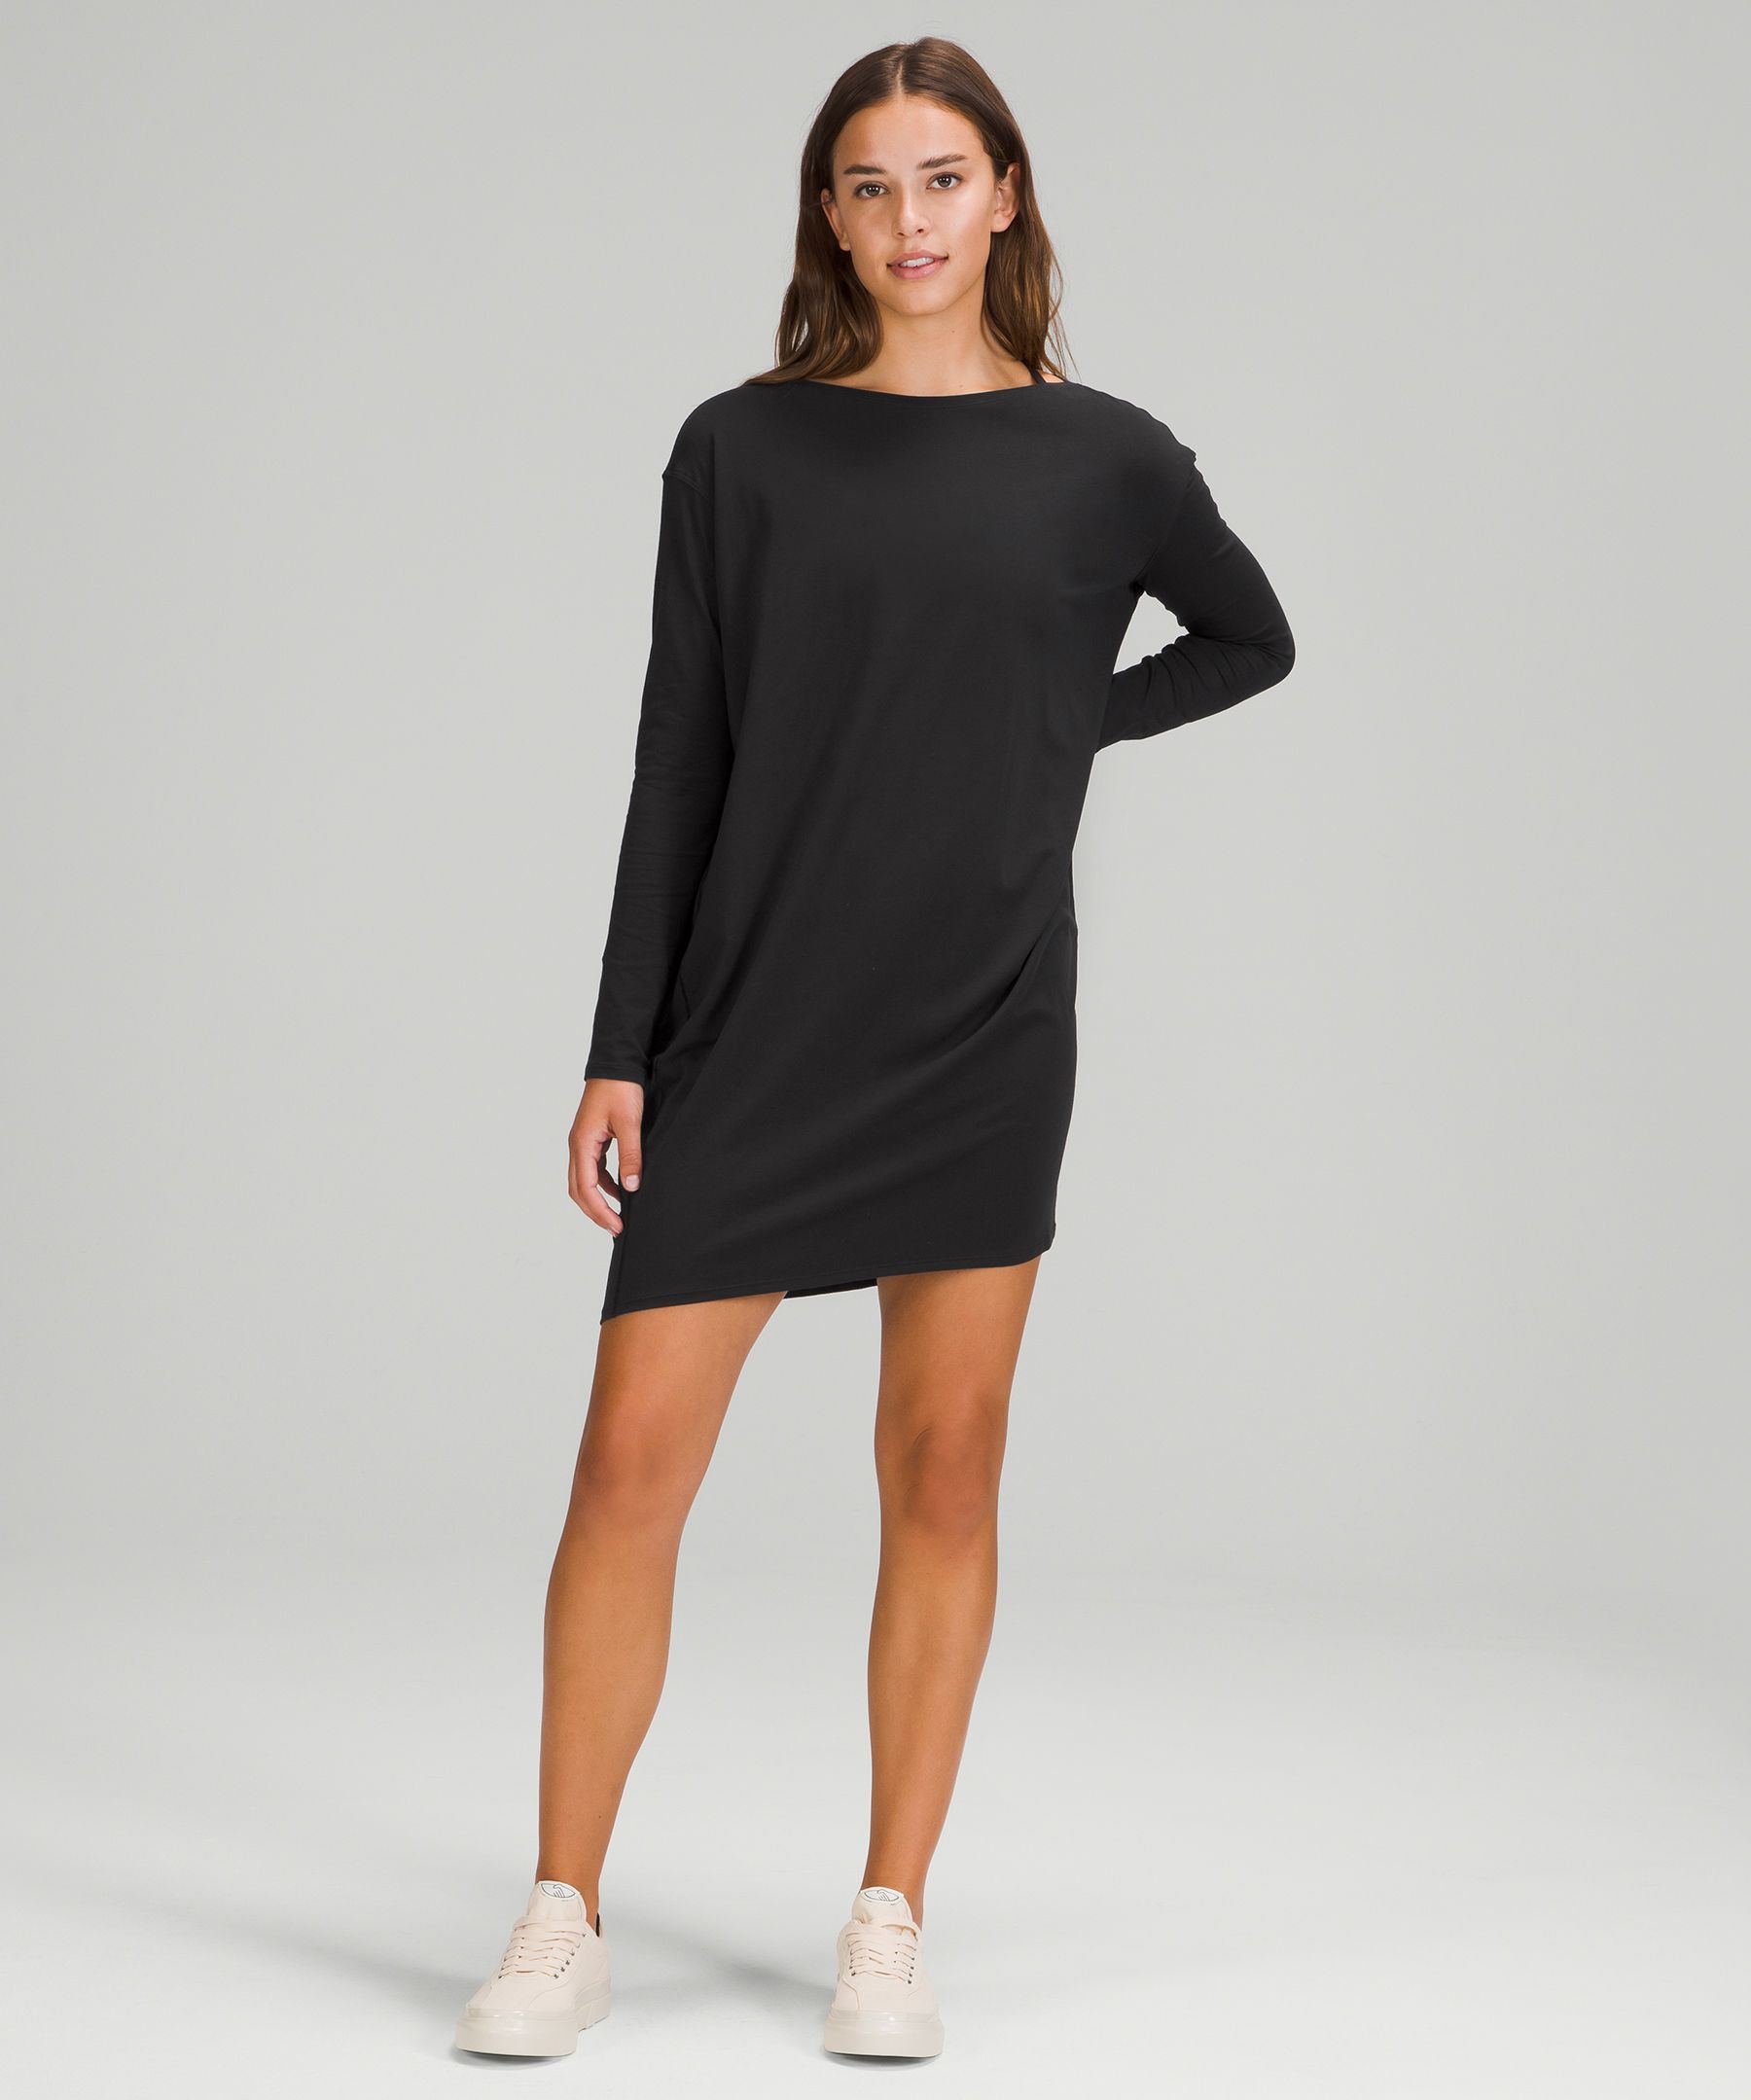 Lululemon Back In Action Dress Reviewed Articles